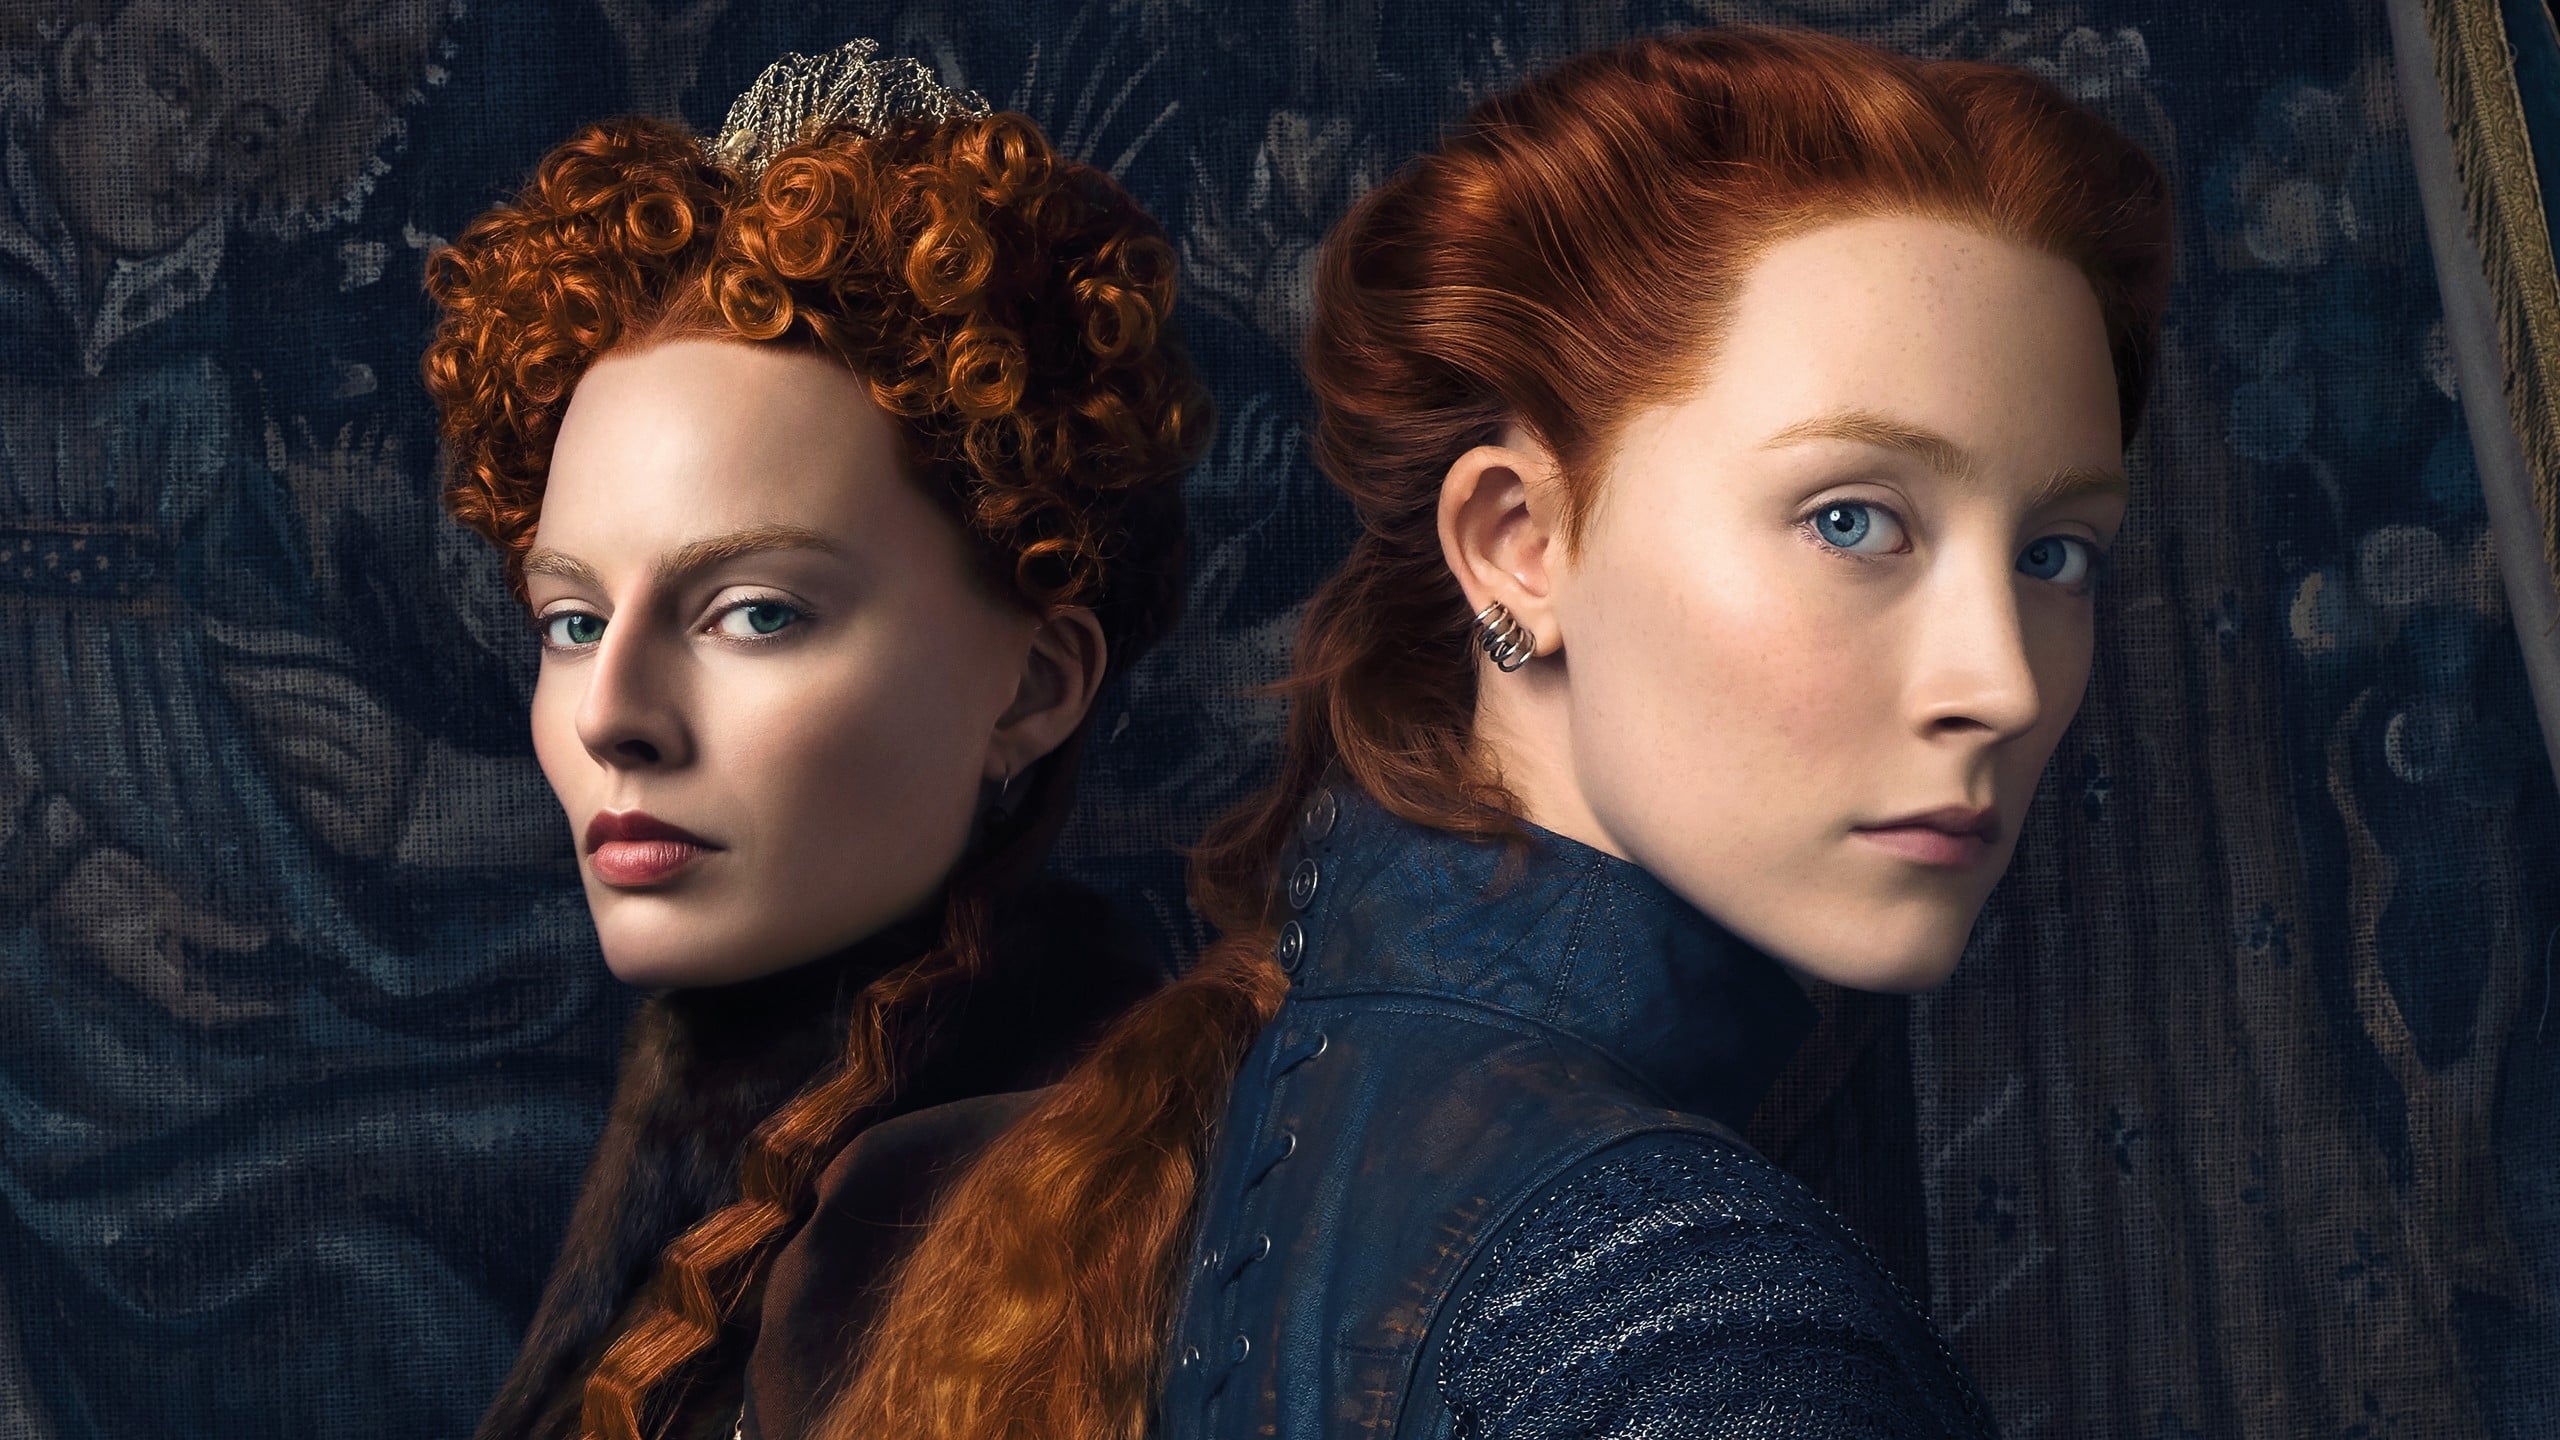 Nữ Hoàng Scotland - Mary Queen of Scots